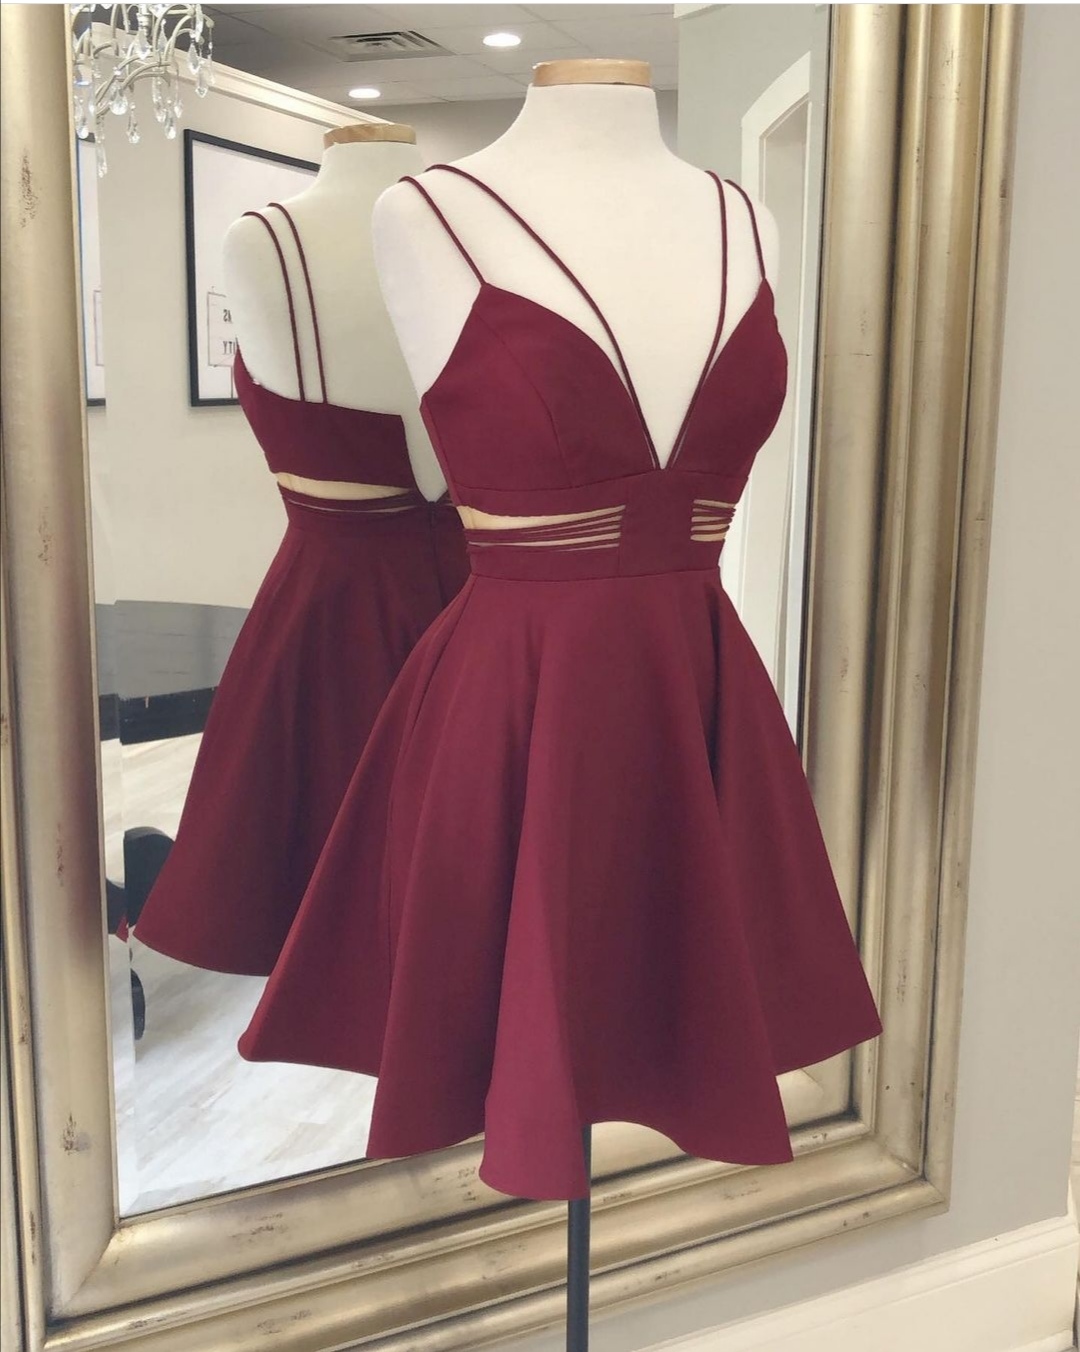 Wine Short Homecoming Dress With Cut-out Waist